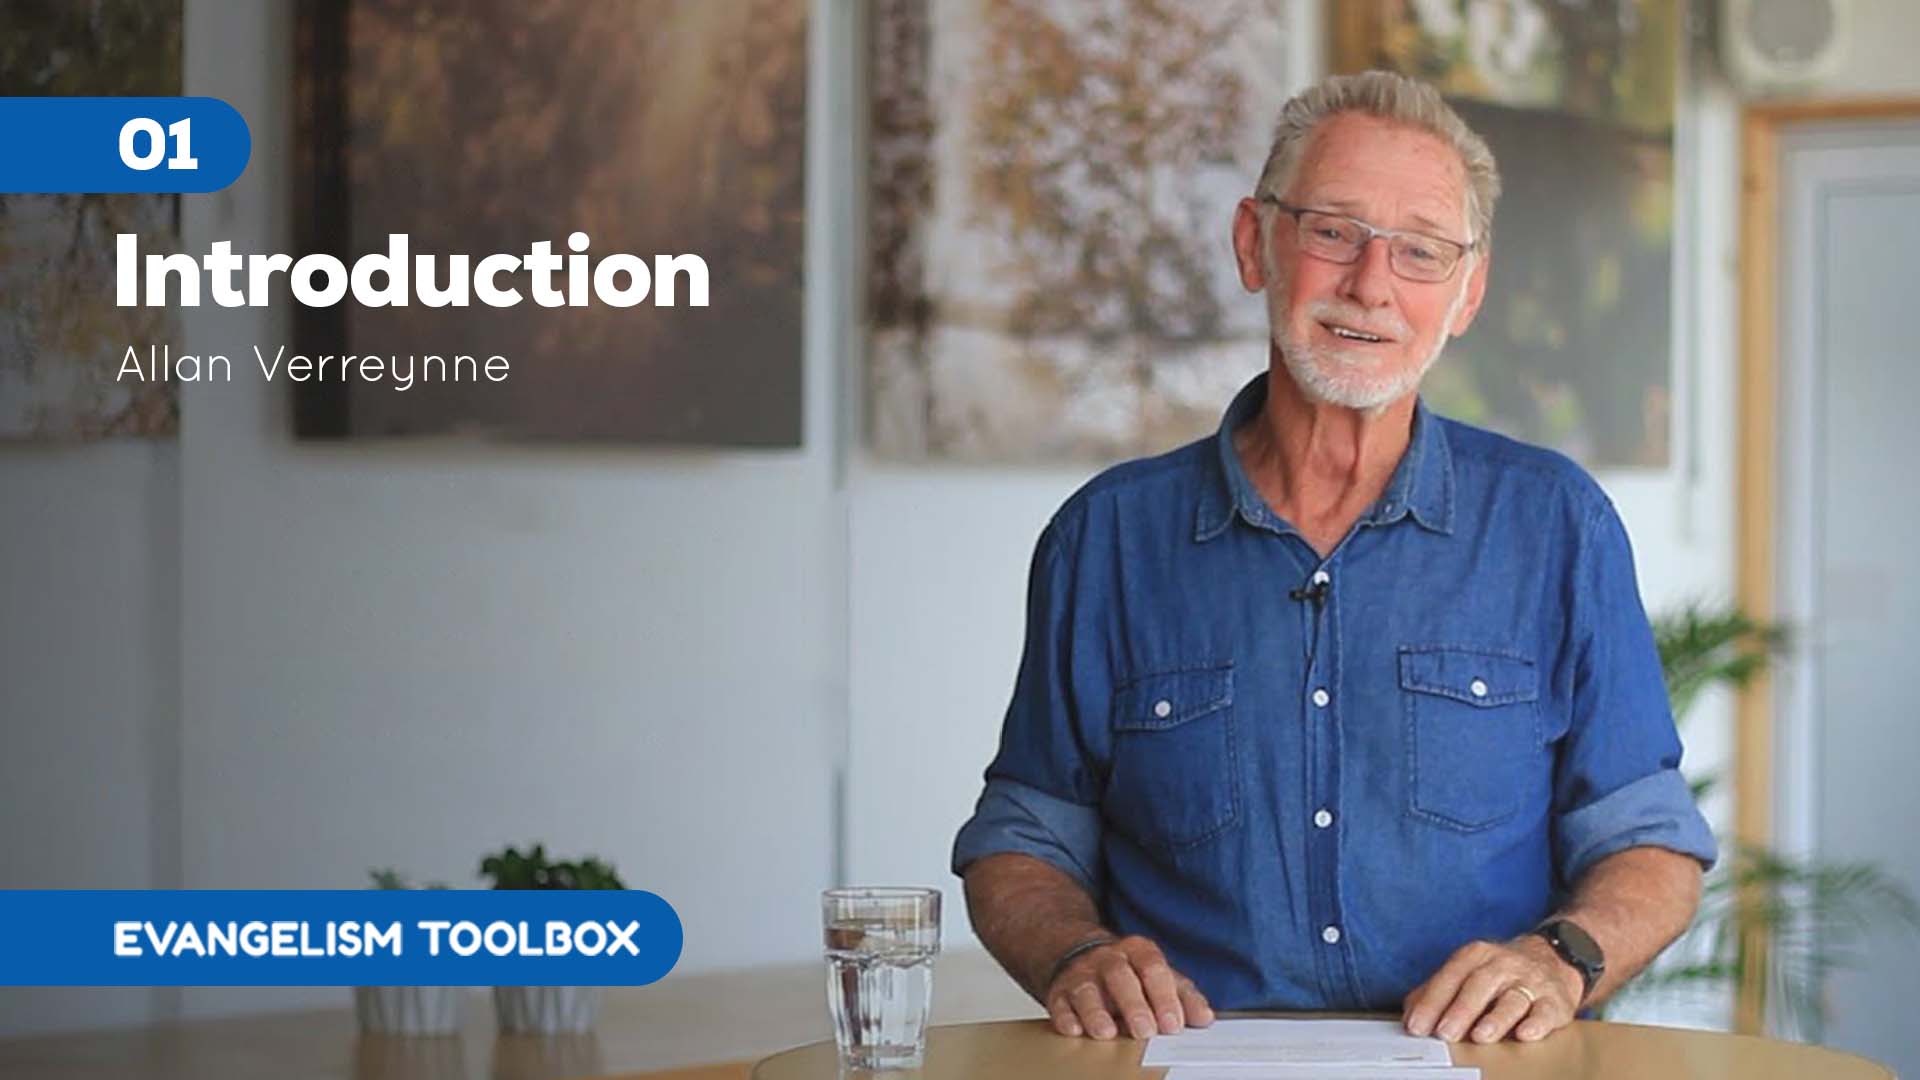 Video image for '01 Introduction' about Evangelism Toolbox series